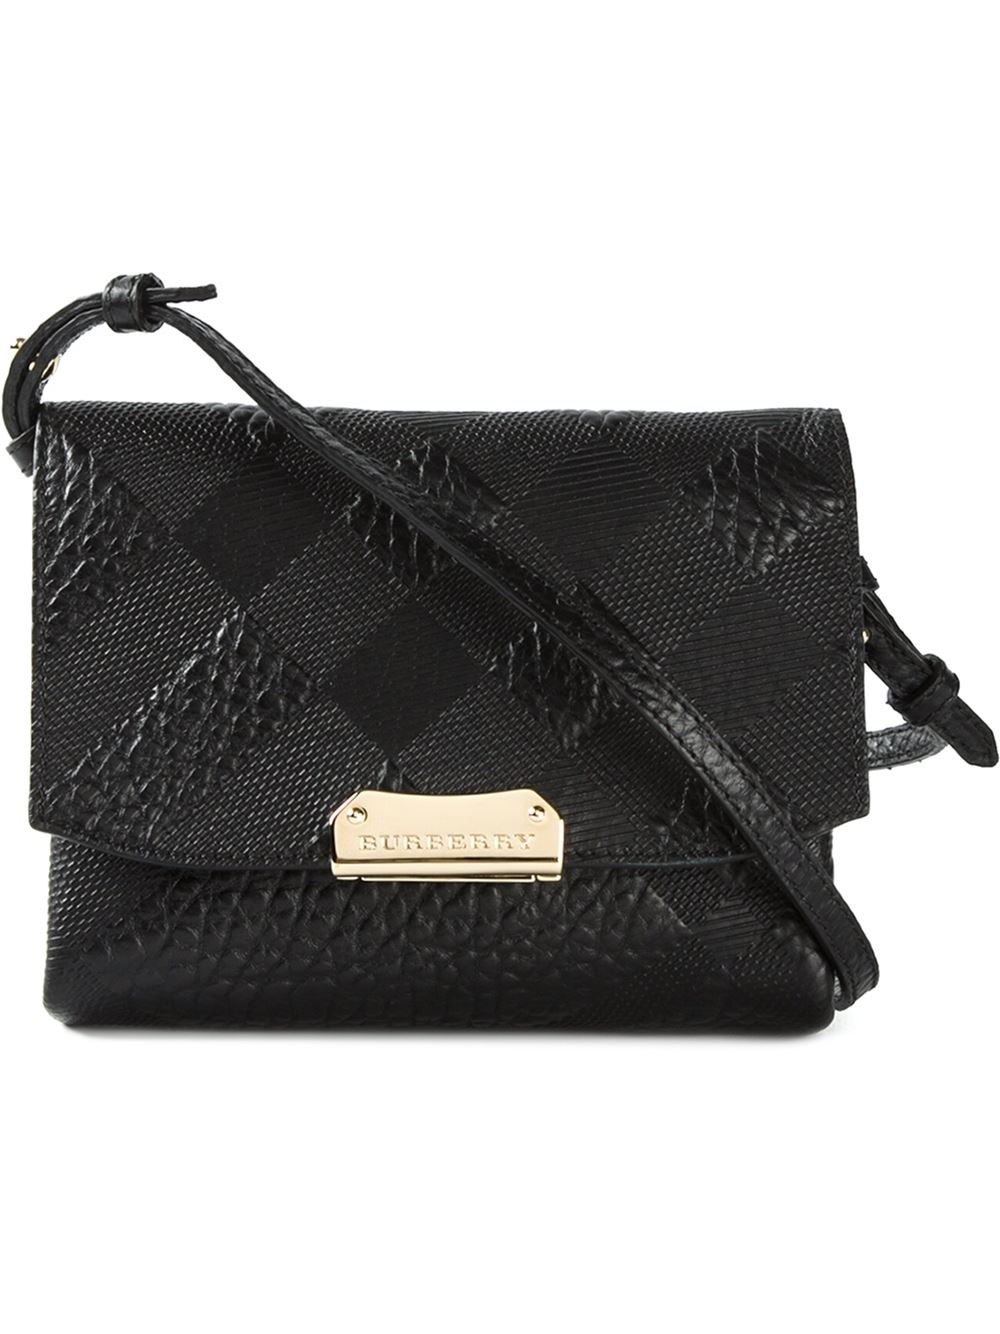 Burberry Embossed-Check Leather Cross-Body Bag in Black - Lyst